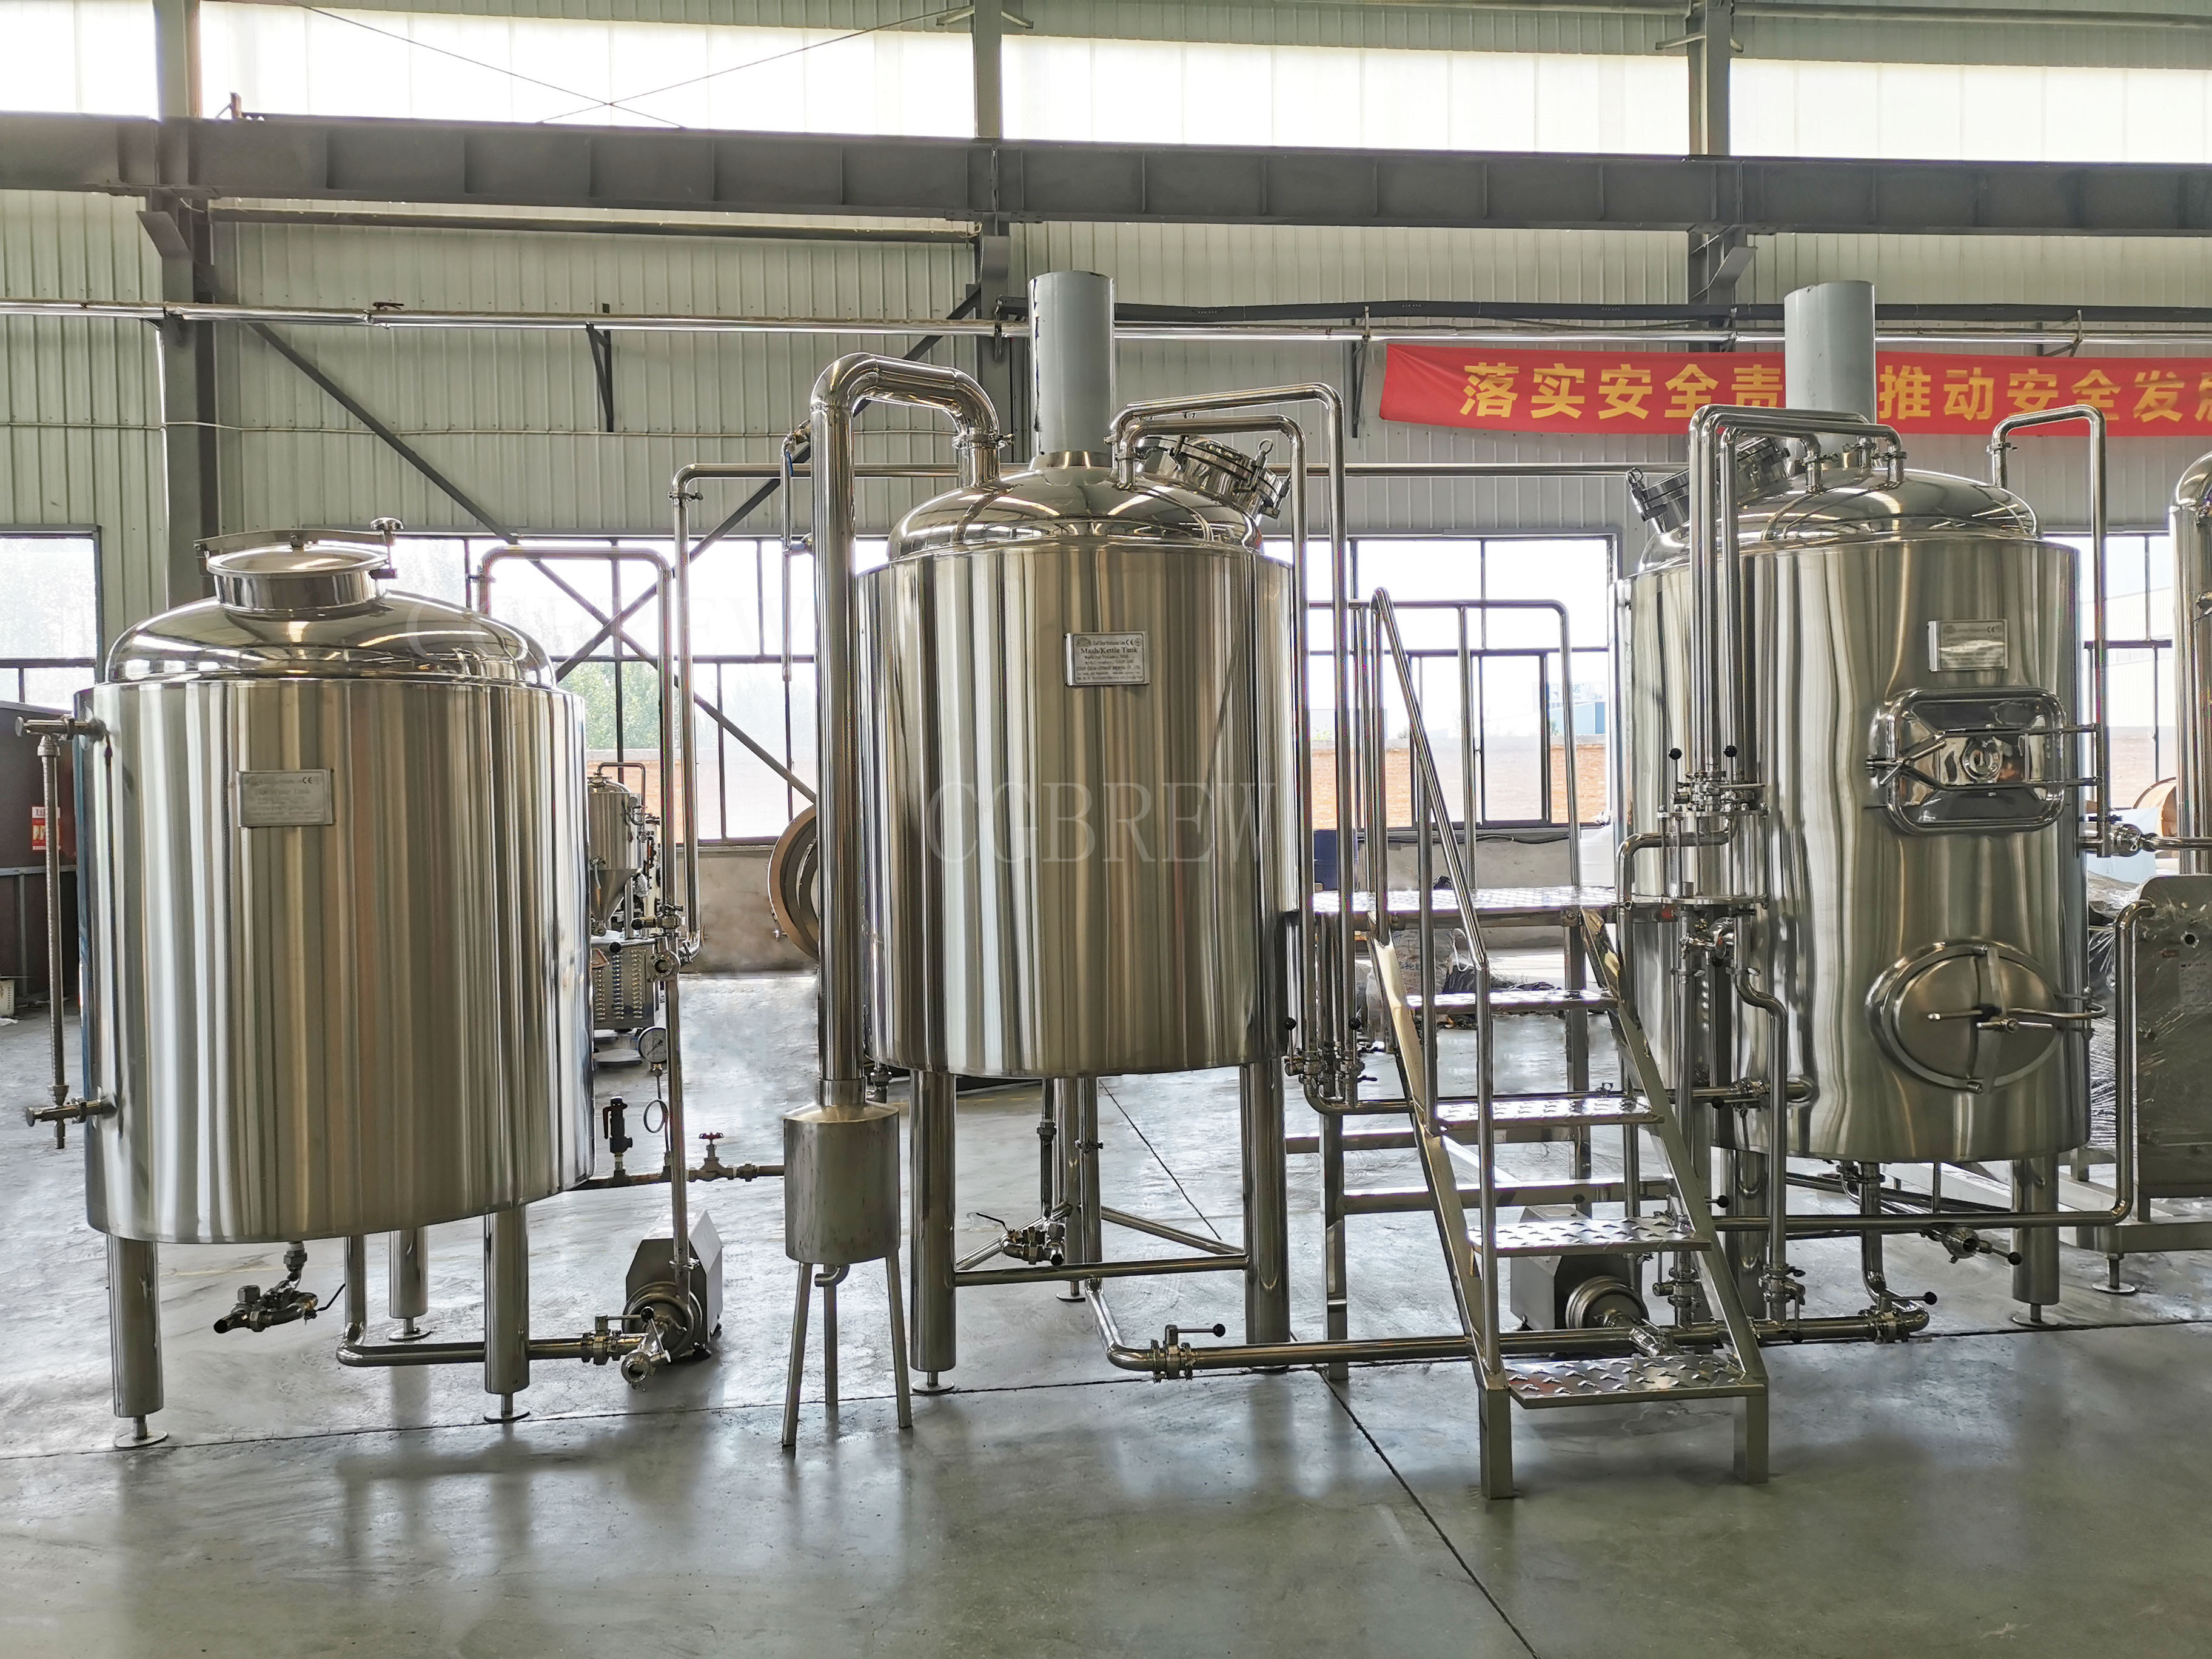 A New 500L Beer Brewery Equipment are Delivered